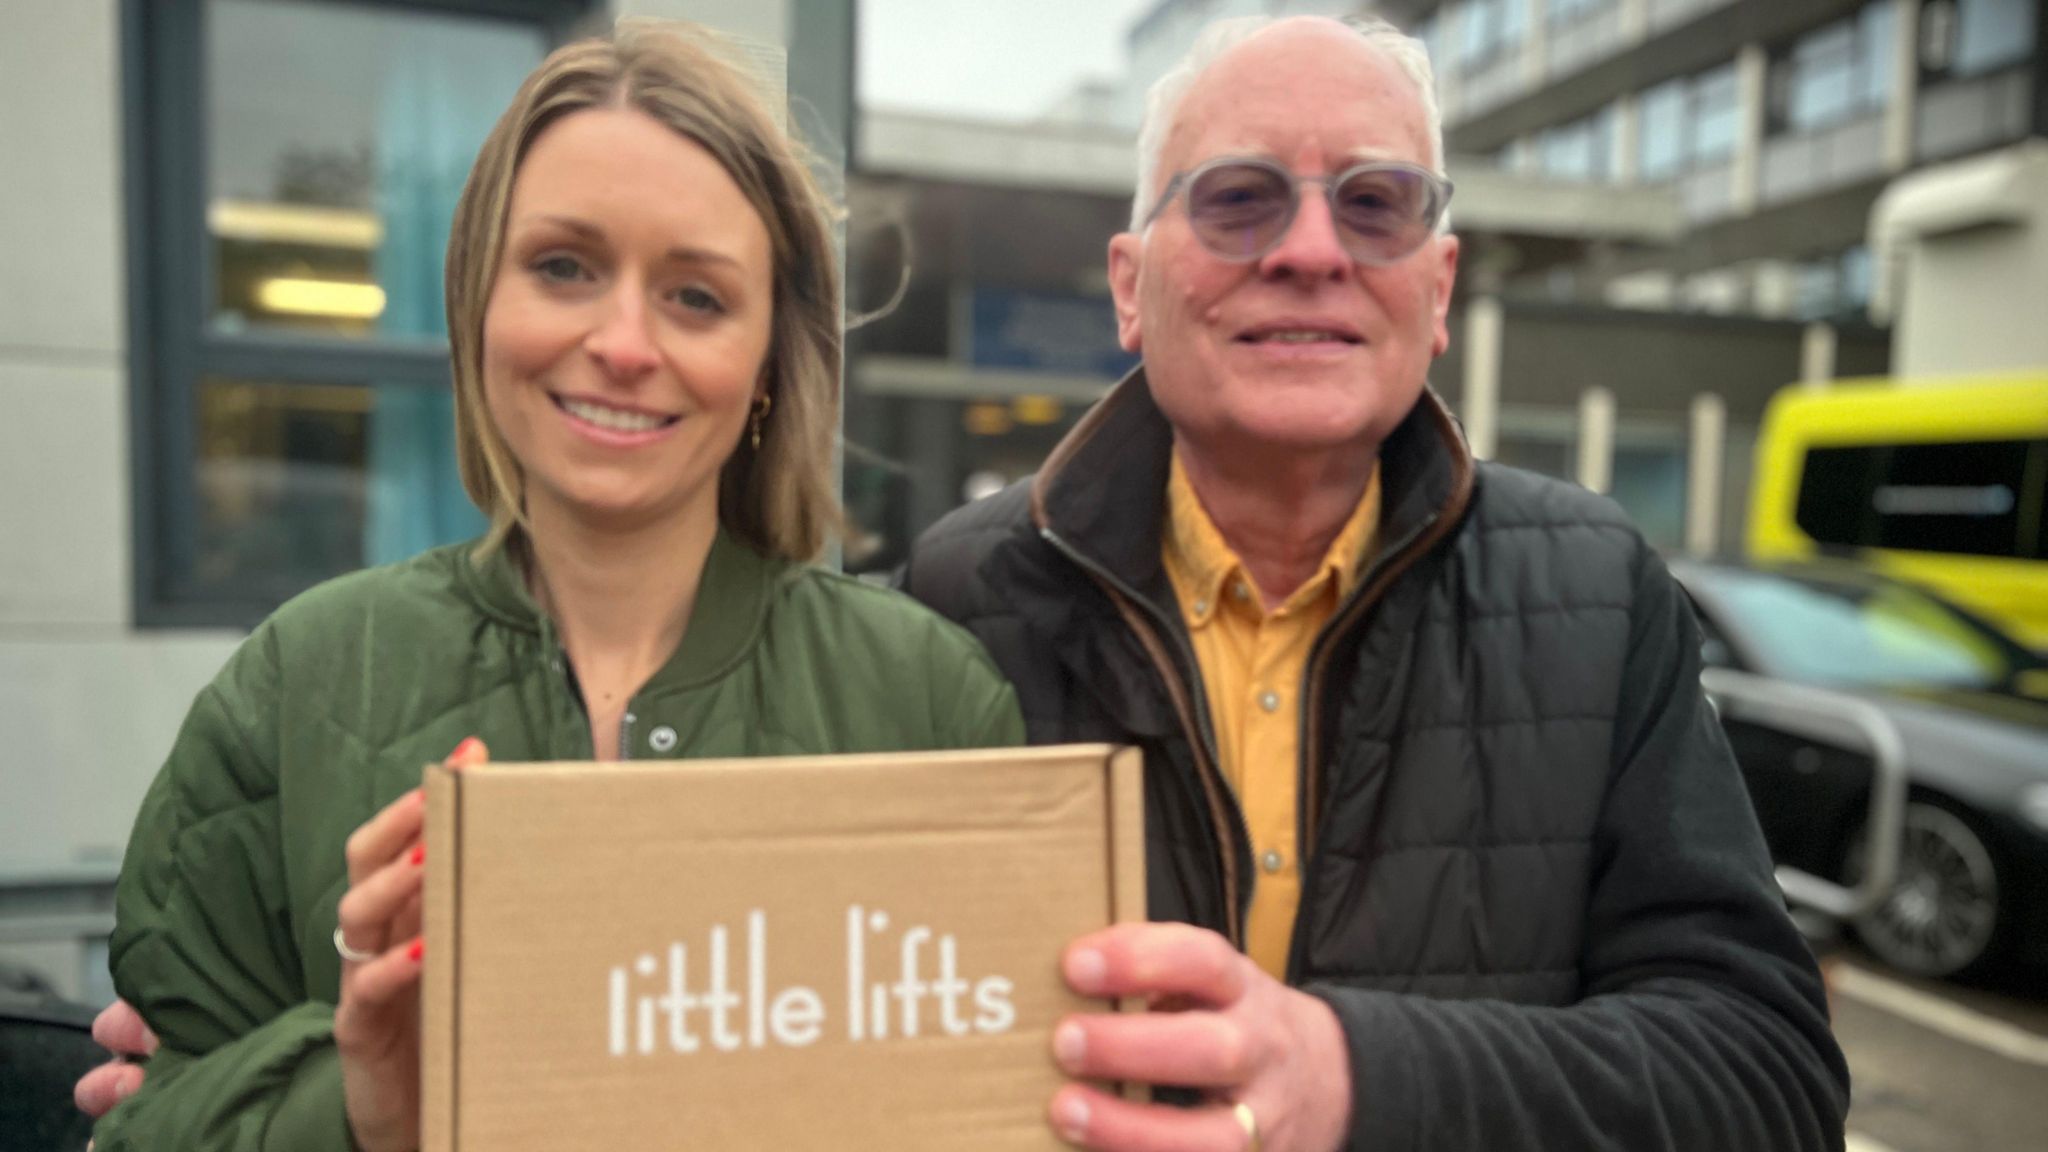 Oa and Graham standing outside Addenbrooke's hospital together holding a Little Lifts cardboard gift box